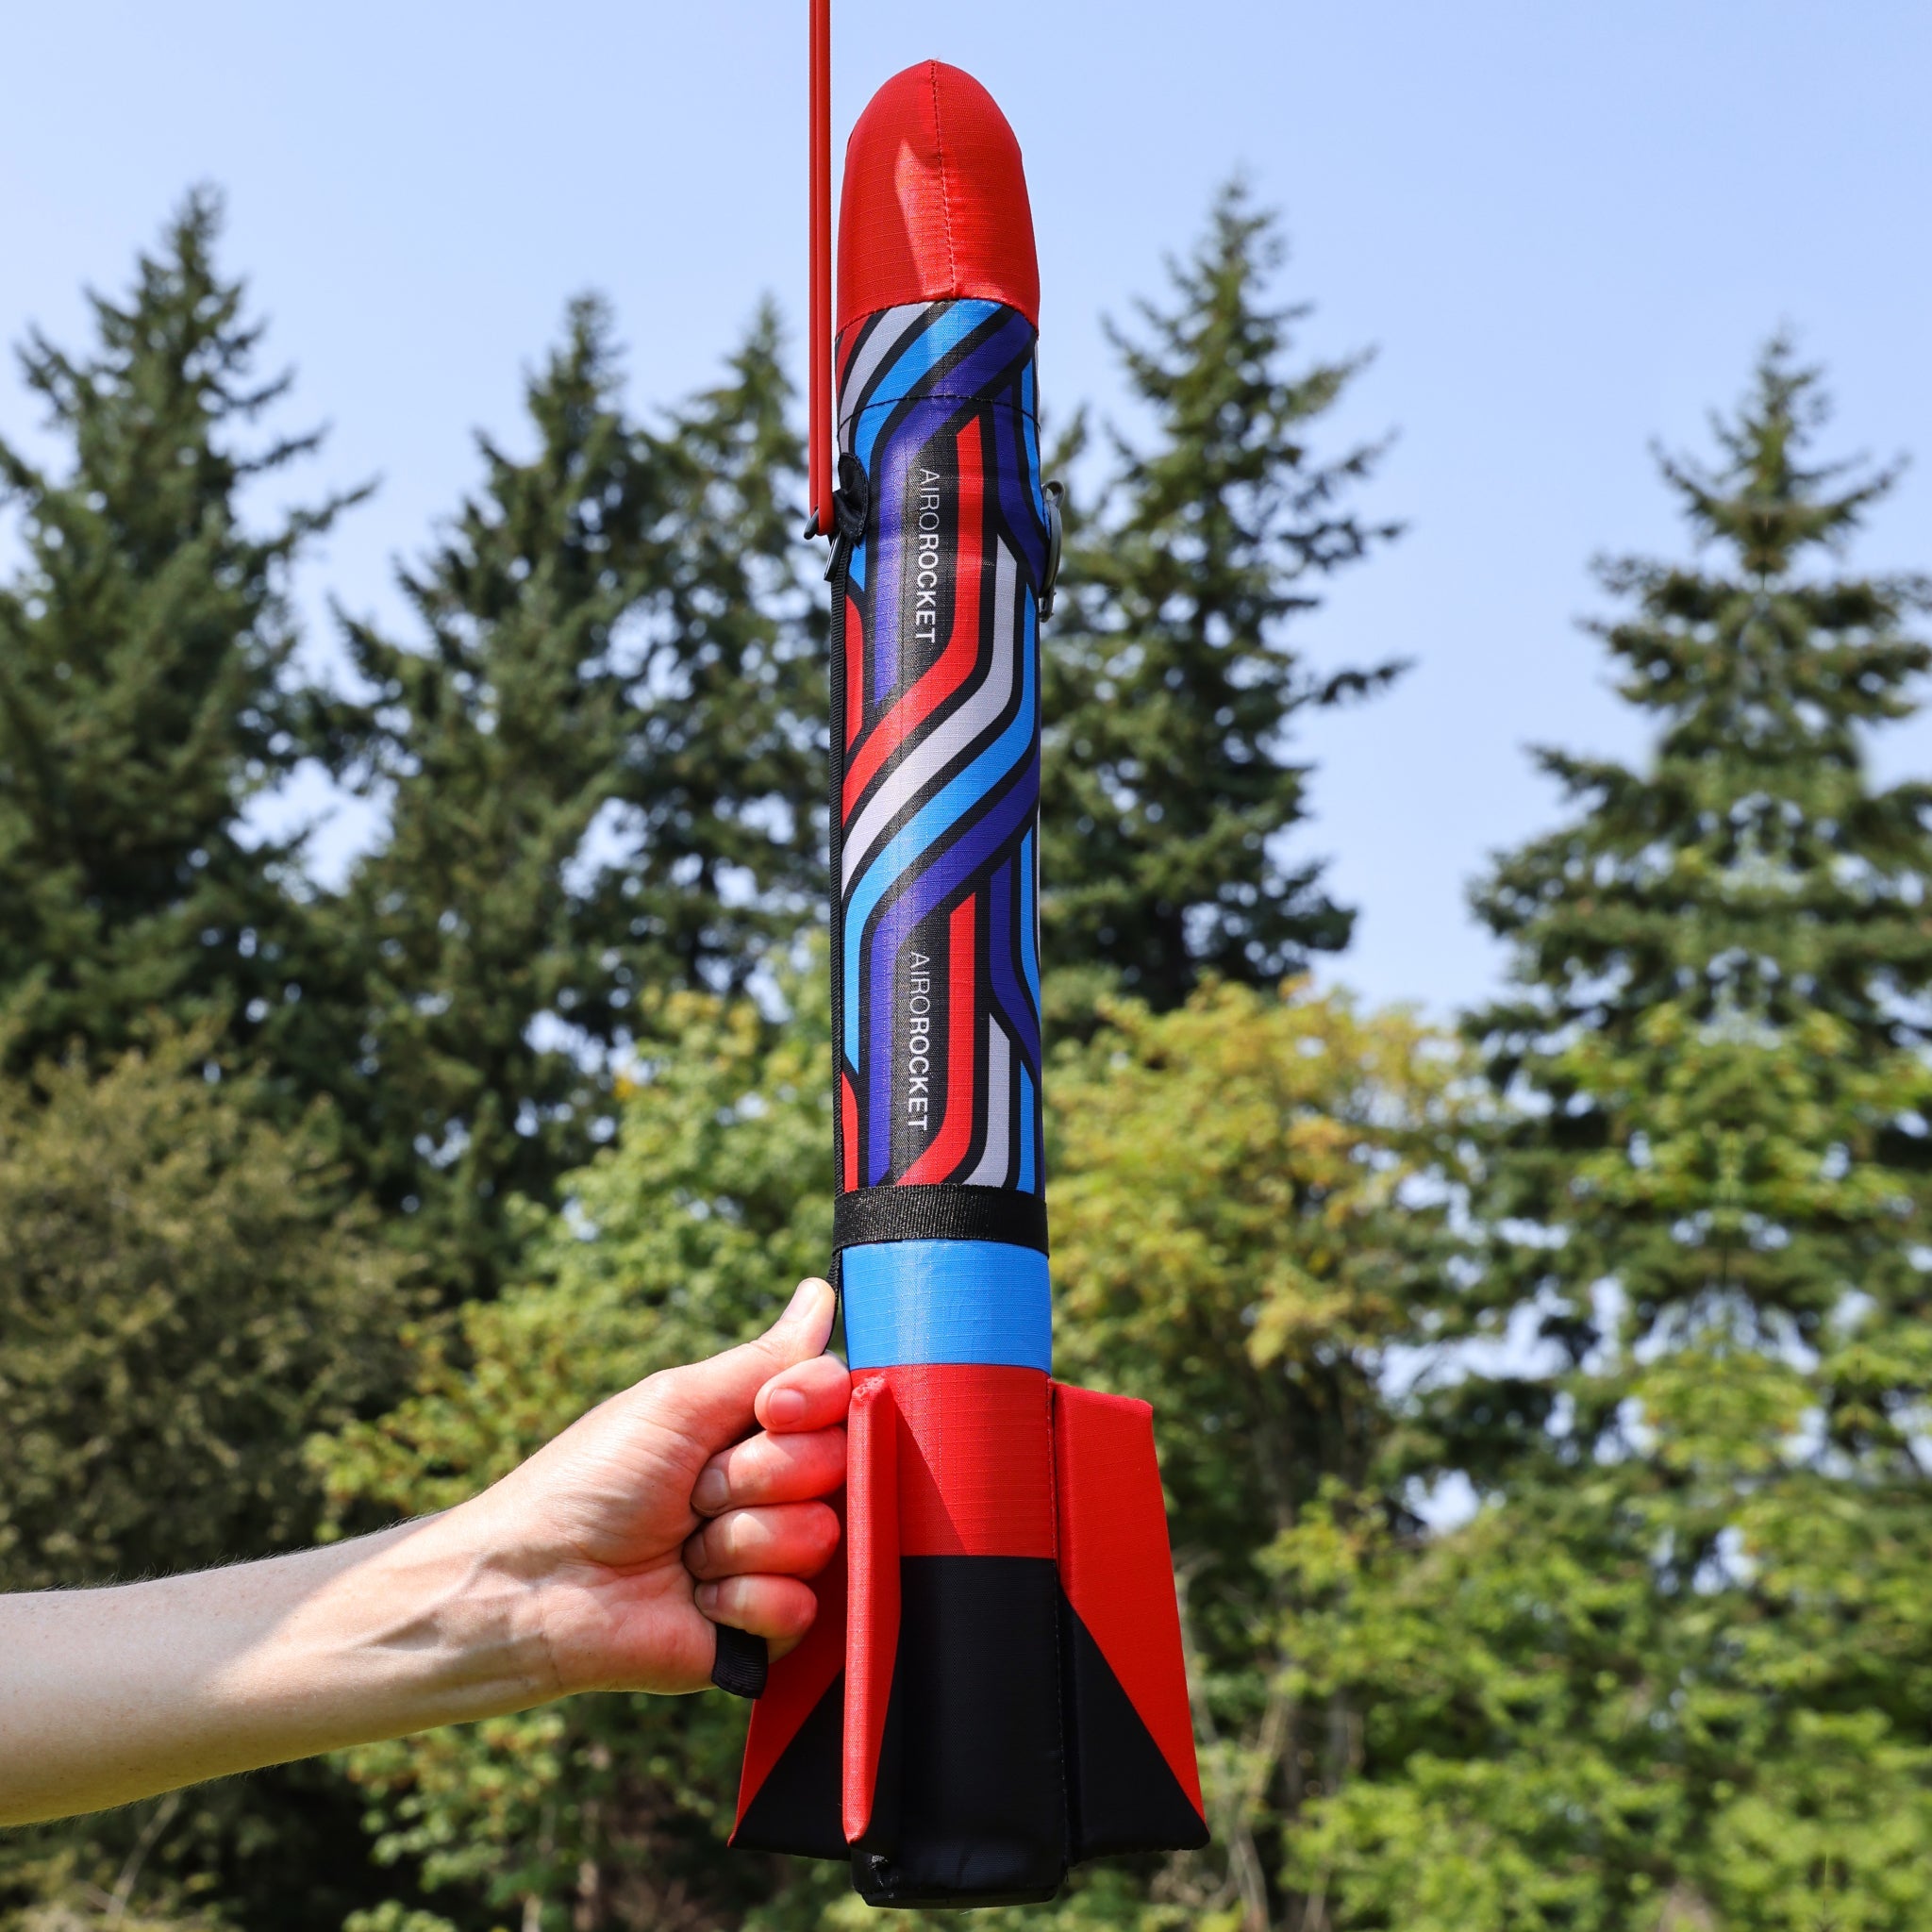 Red Airo Rocket toy rocket being launched outside. By Mighty Fun!